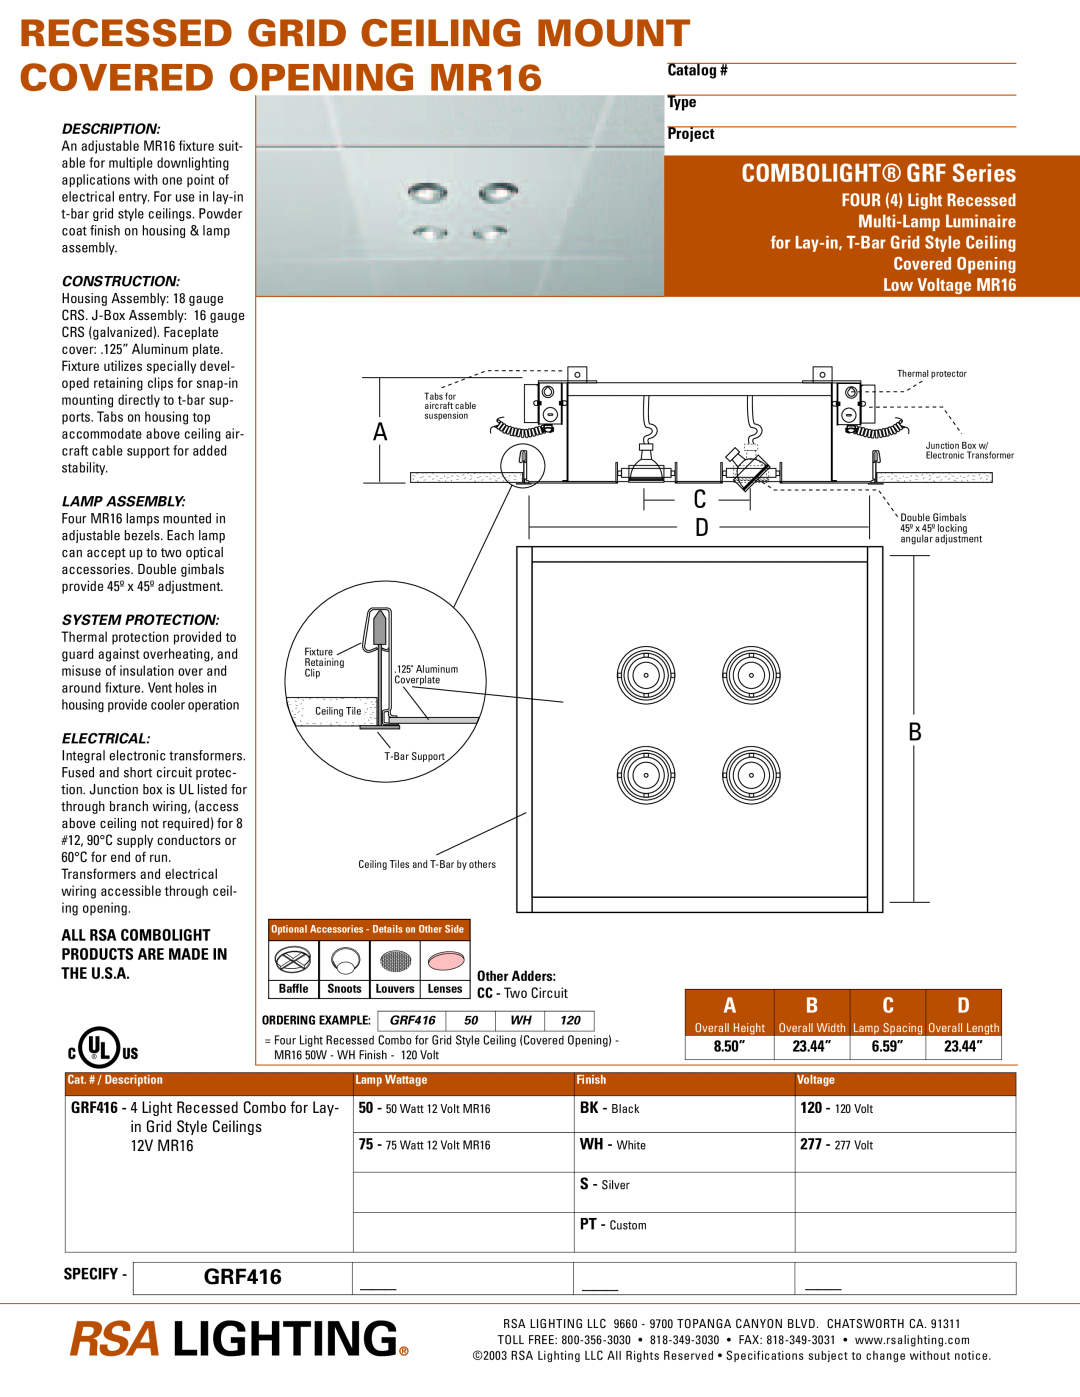 Cooper Lighting GRF416 specifications Recessed Grid Ceiling Mount, COVERED OPENING MR16, COMBOLIGHT GRF Series, Catalog # 